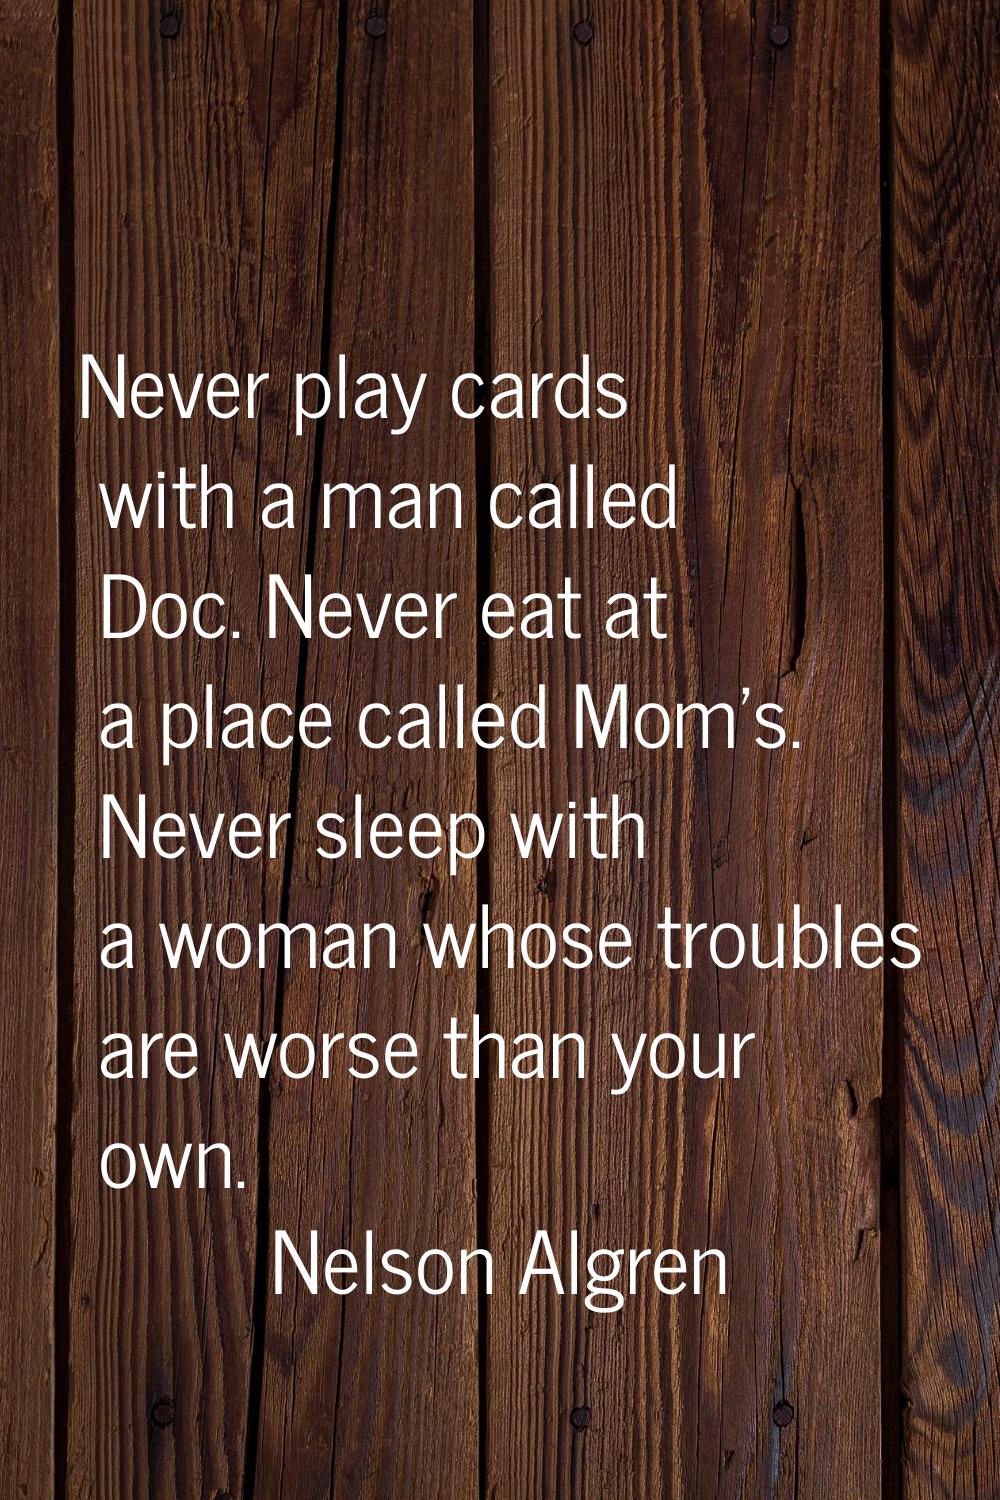 Never play cards with a man called Doc. Never eat at a place called Mom's. Never sleep with a woman